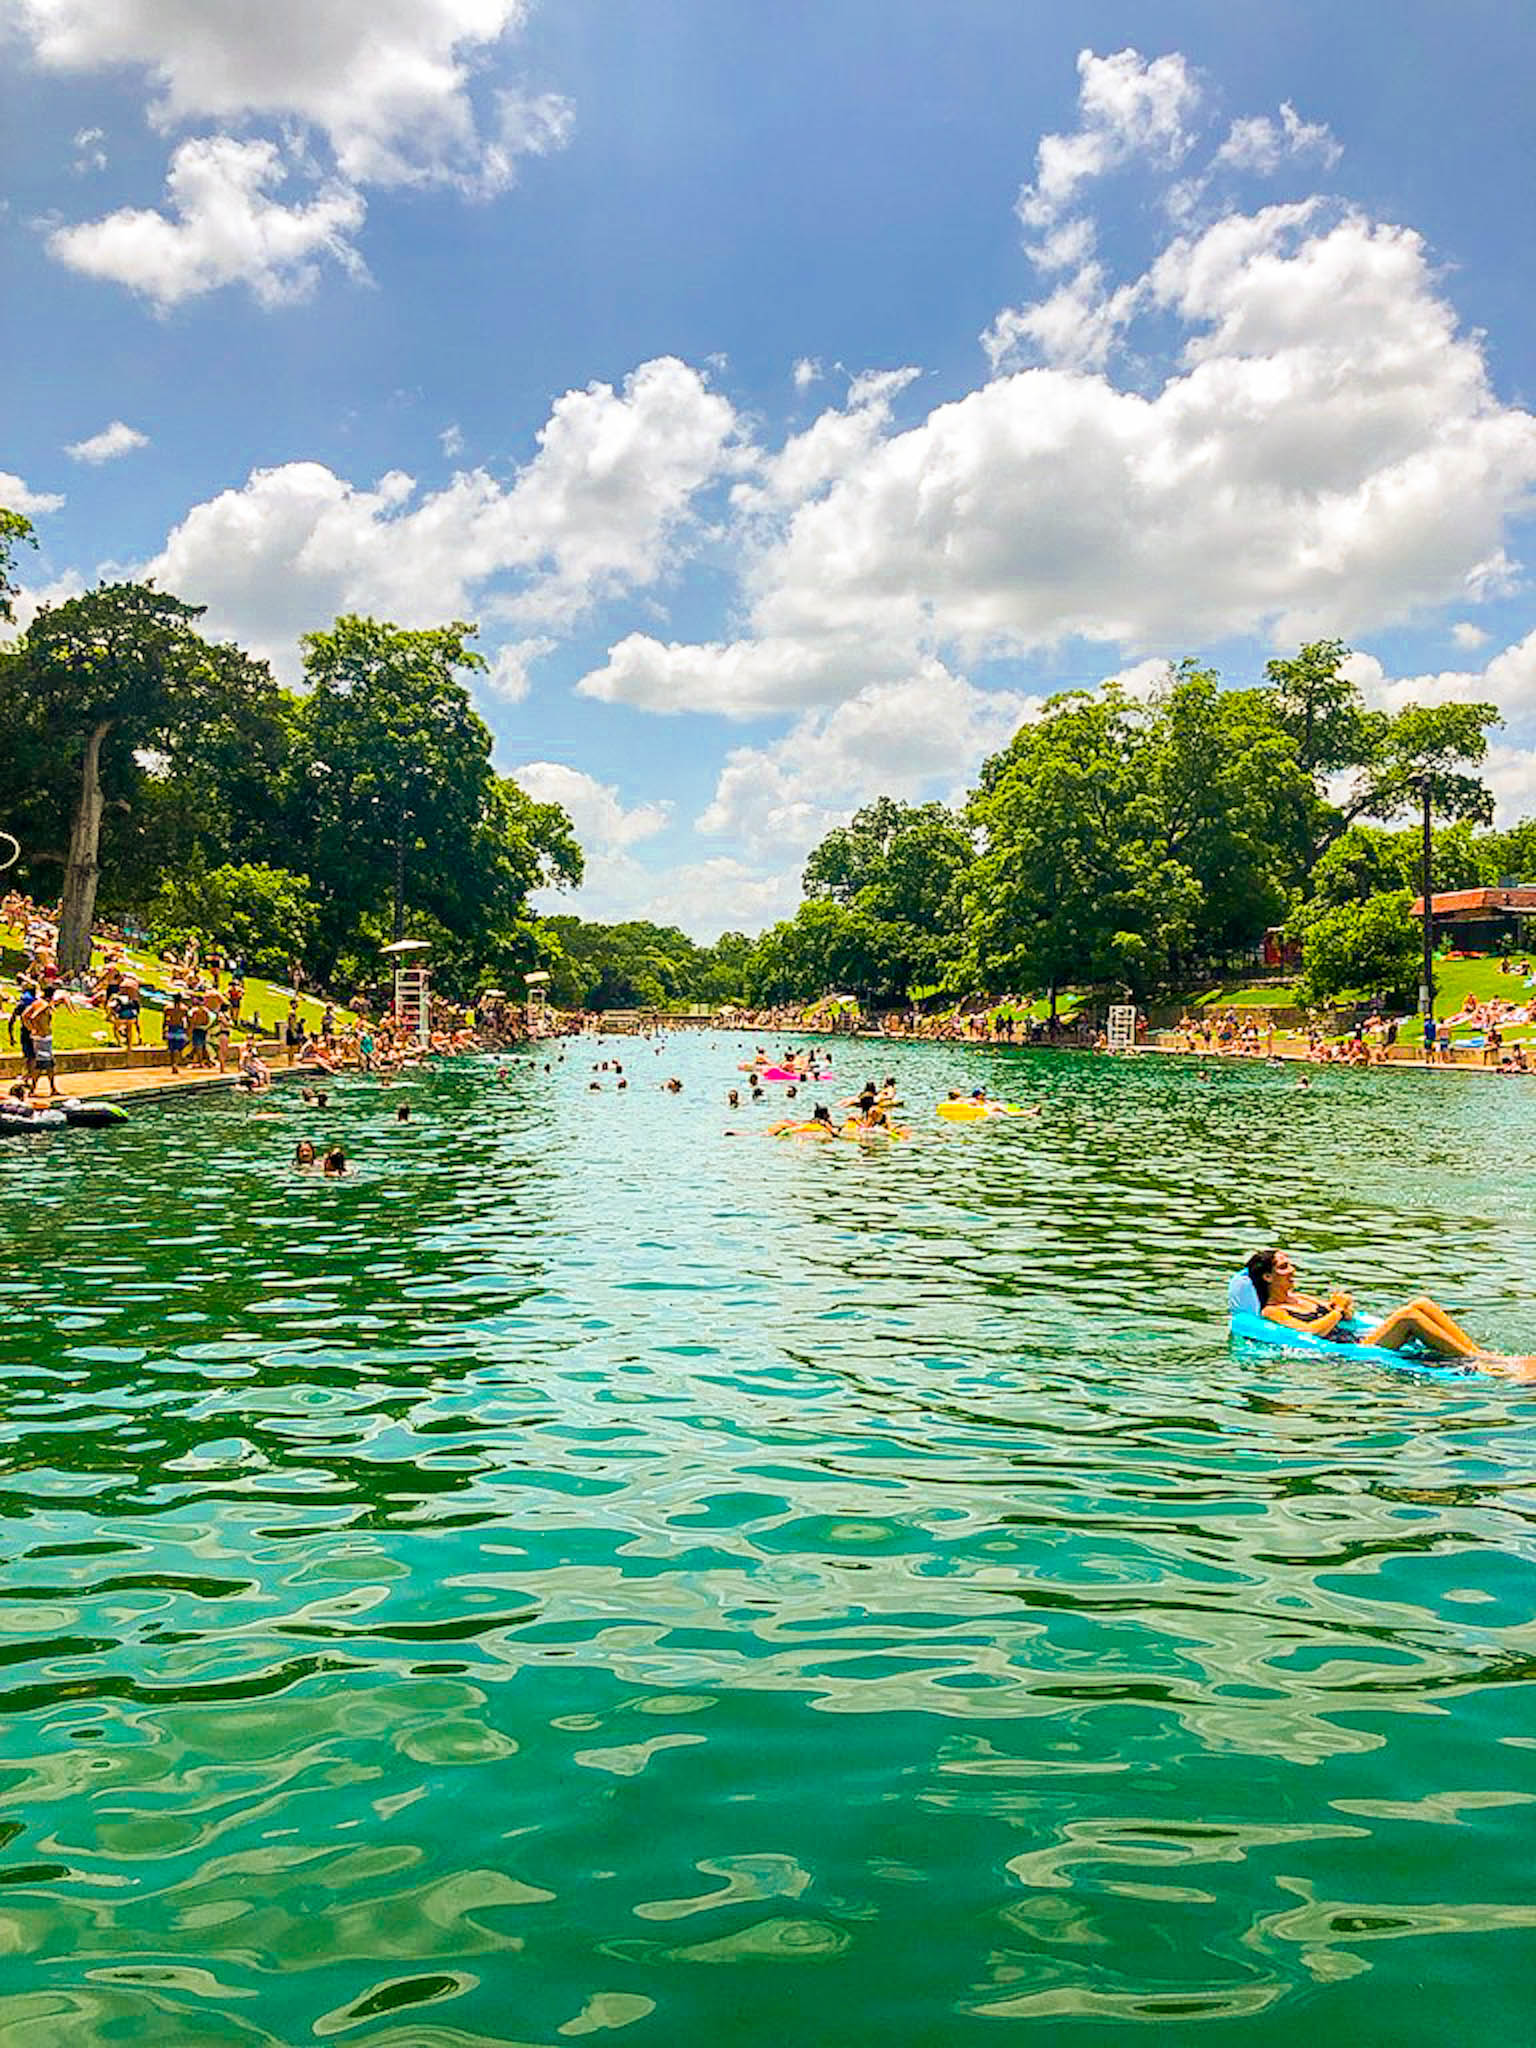 How To Visit Austin on a Budget: 20 Tips